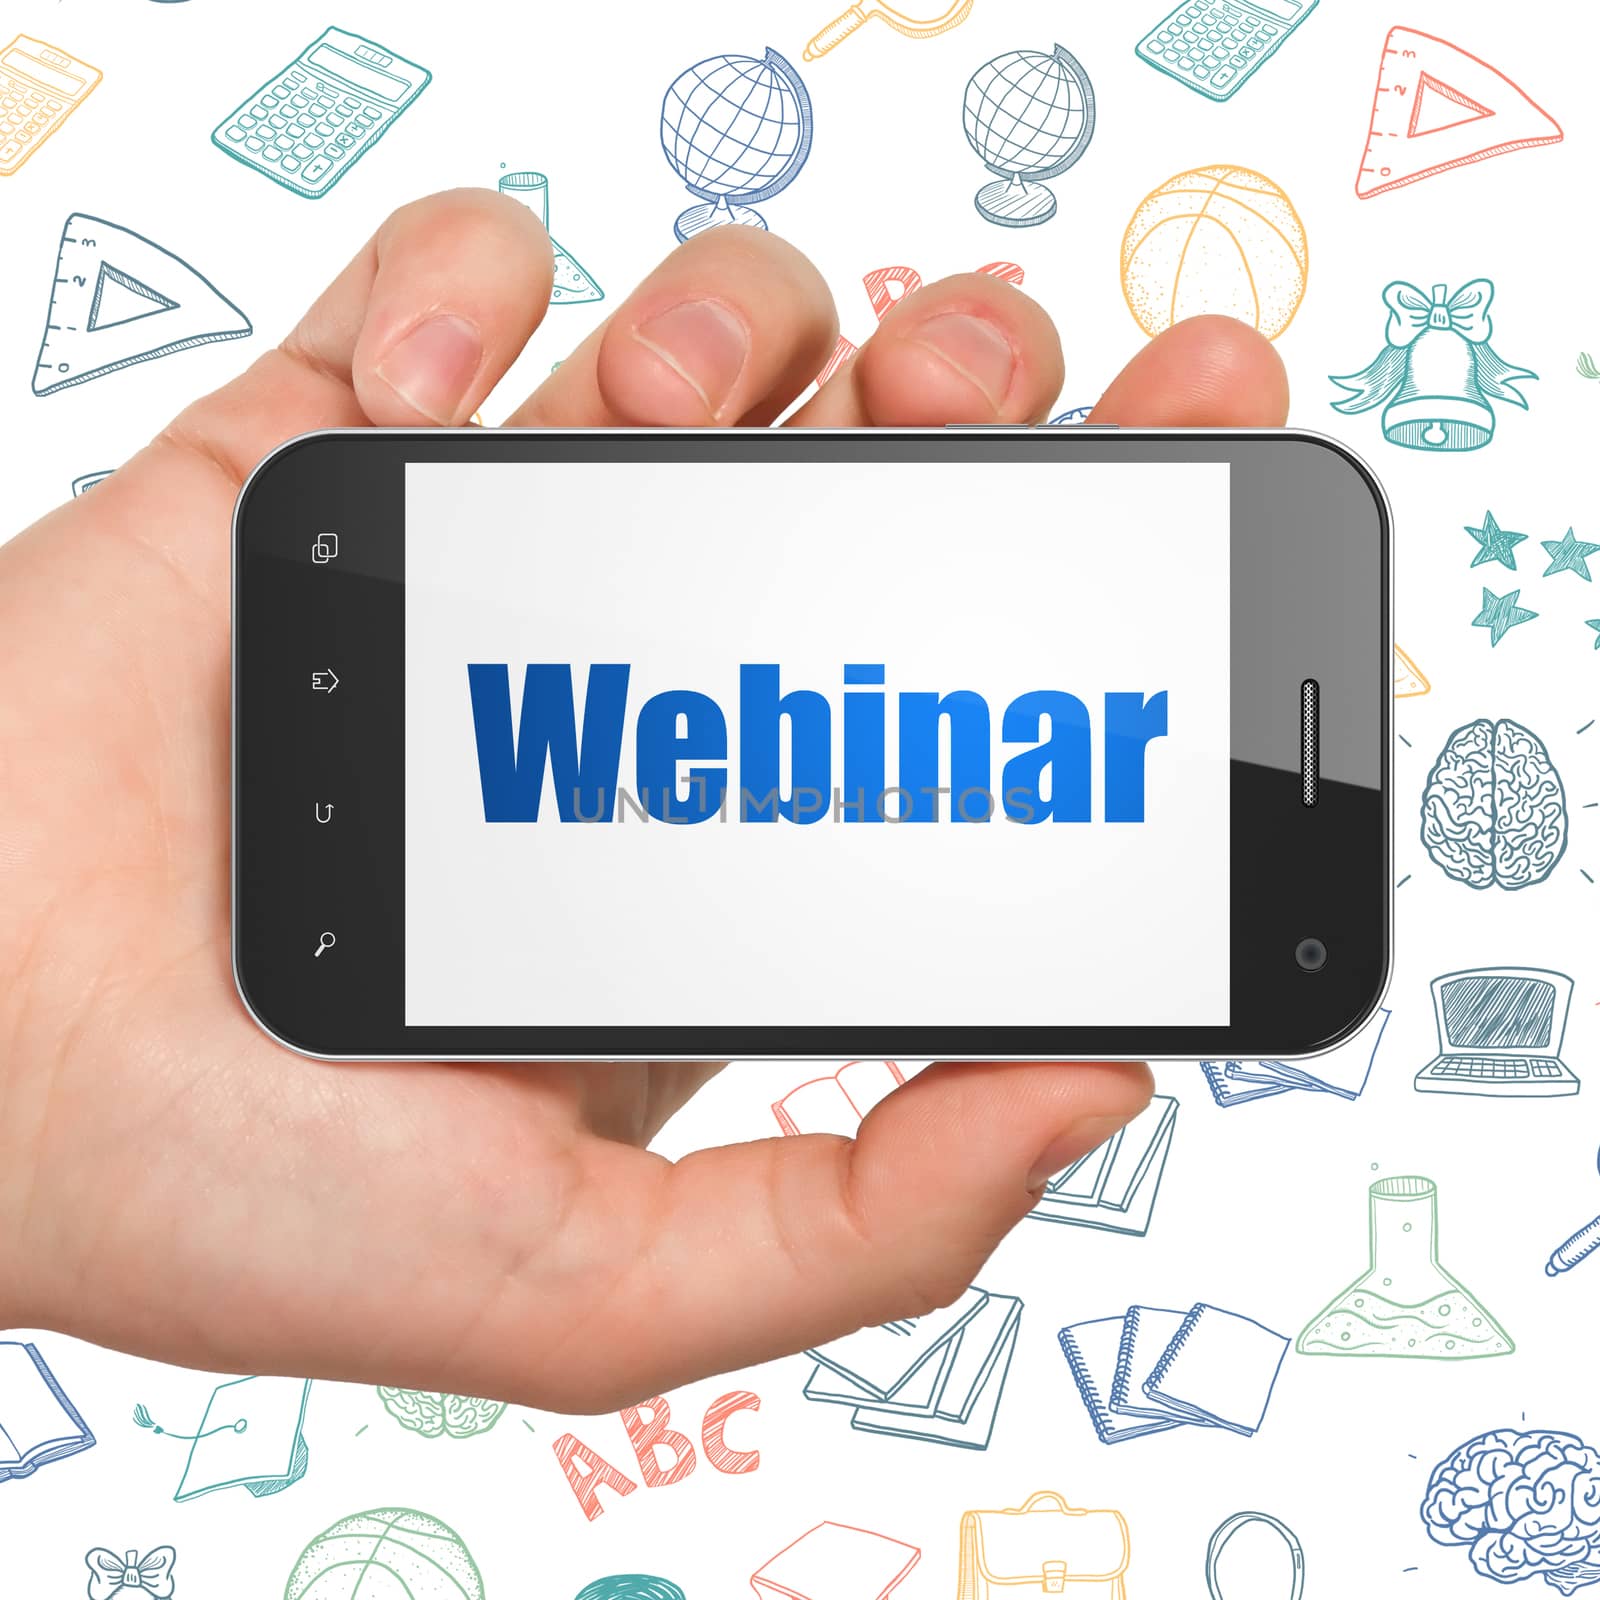 Education concept: Hand Holding Smartphone with  blue text Webinar on display,  Hand Drawn Education Icons background